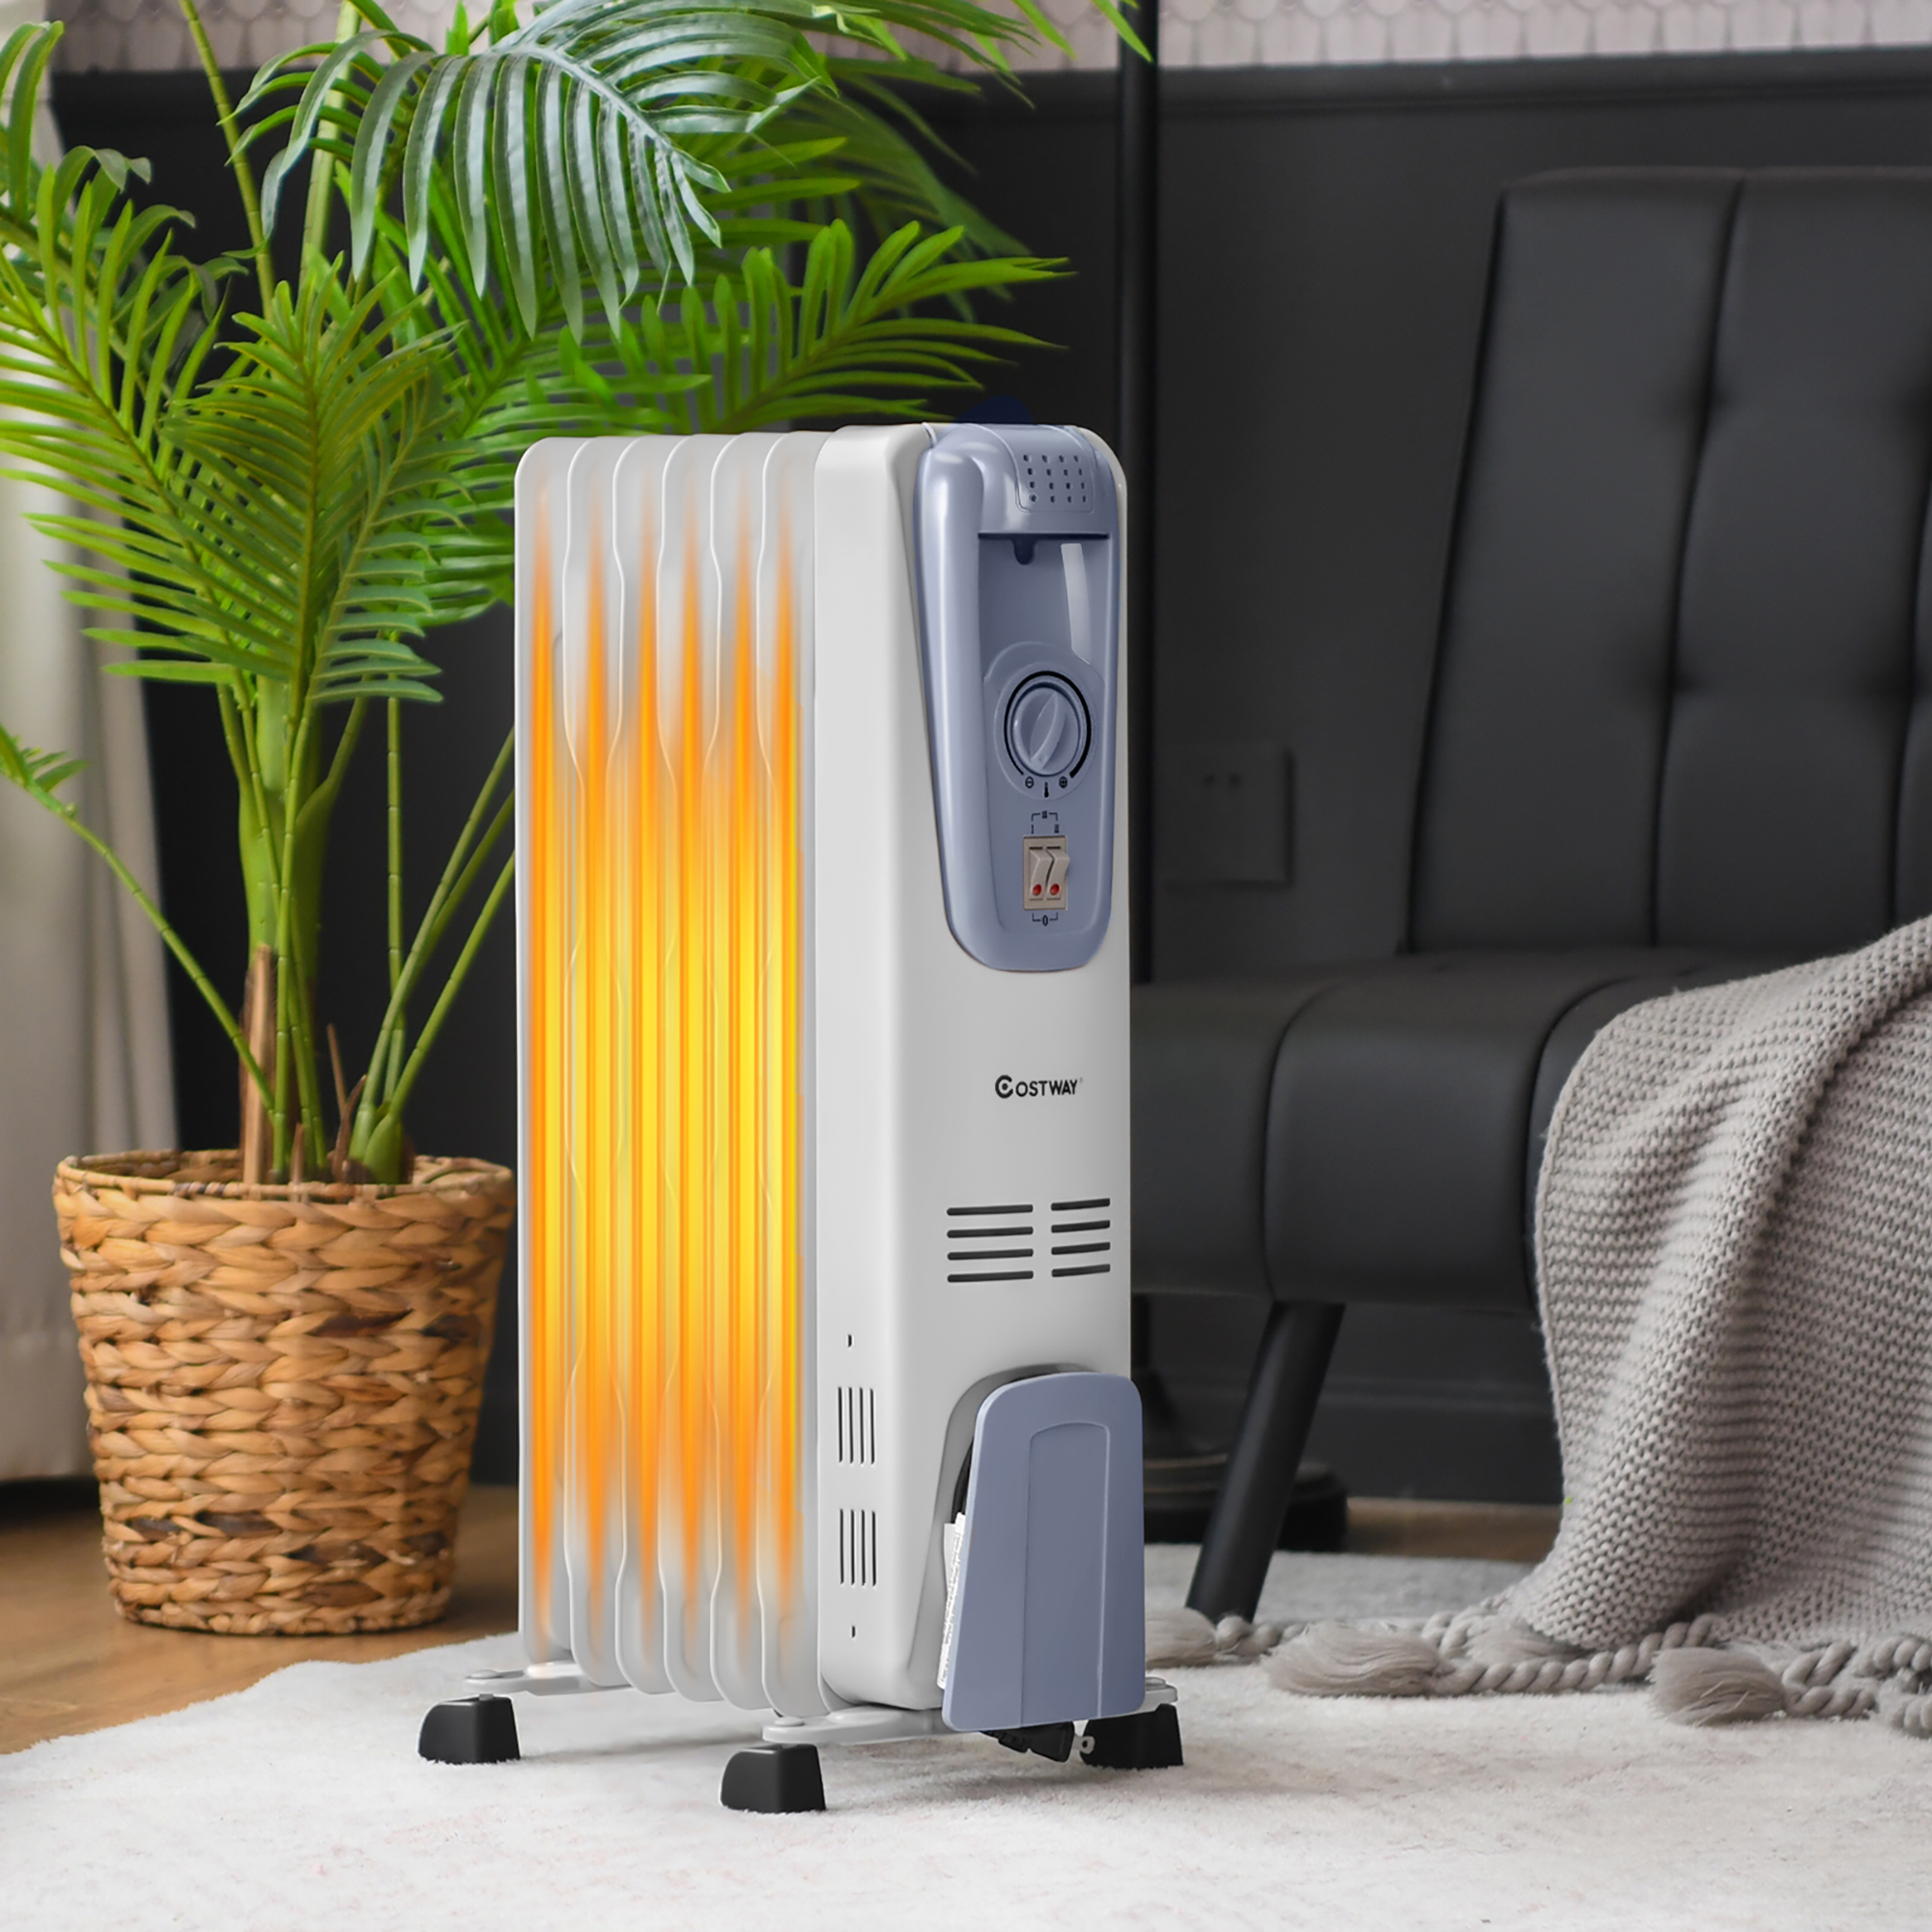 Costway 1500W Electric Oil Filled Radiator Space Heater 7-Fin Thermostat Room Radiant - image 2 of 9